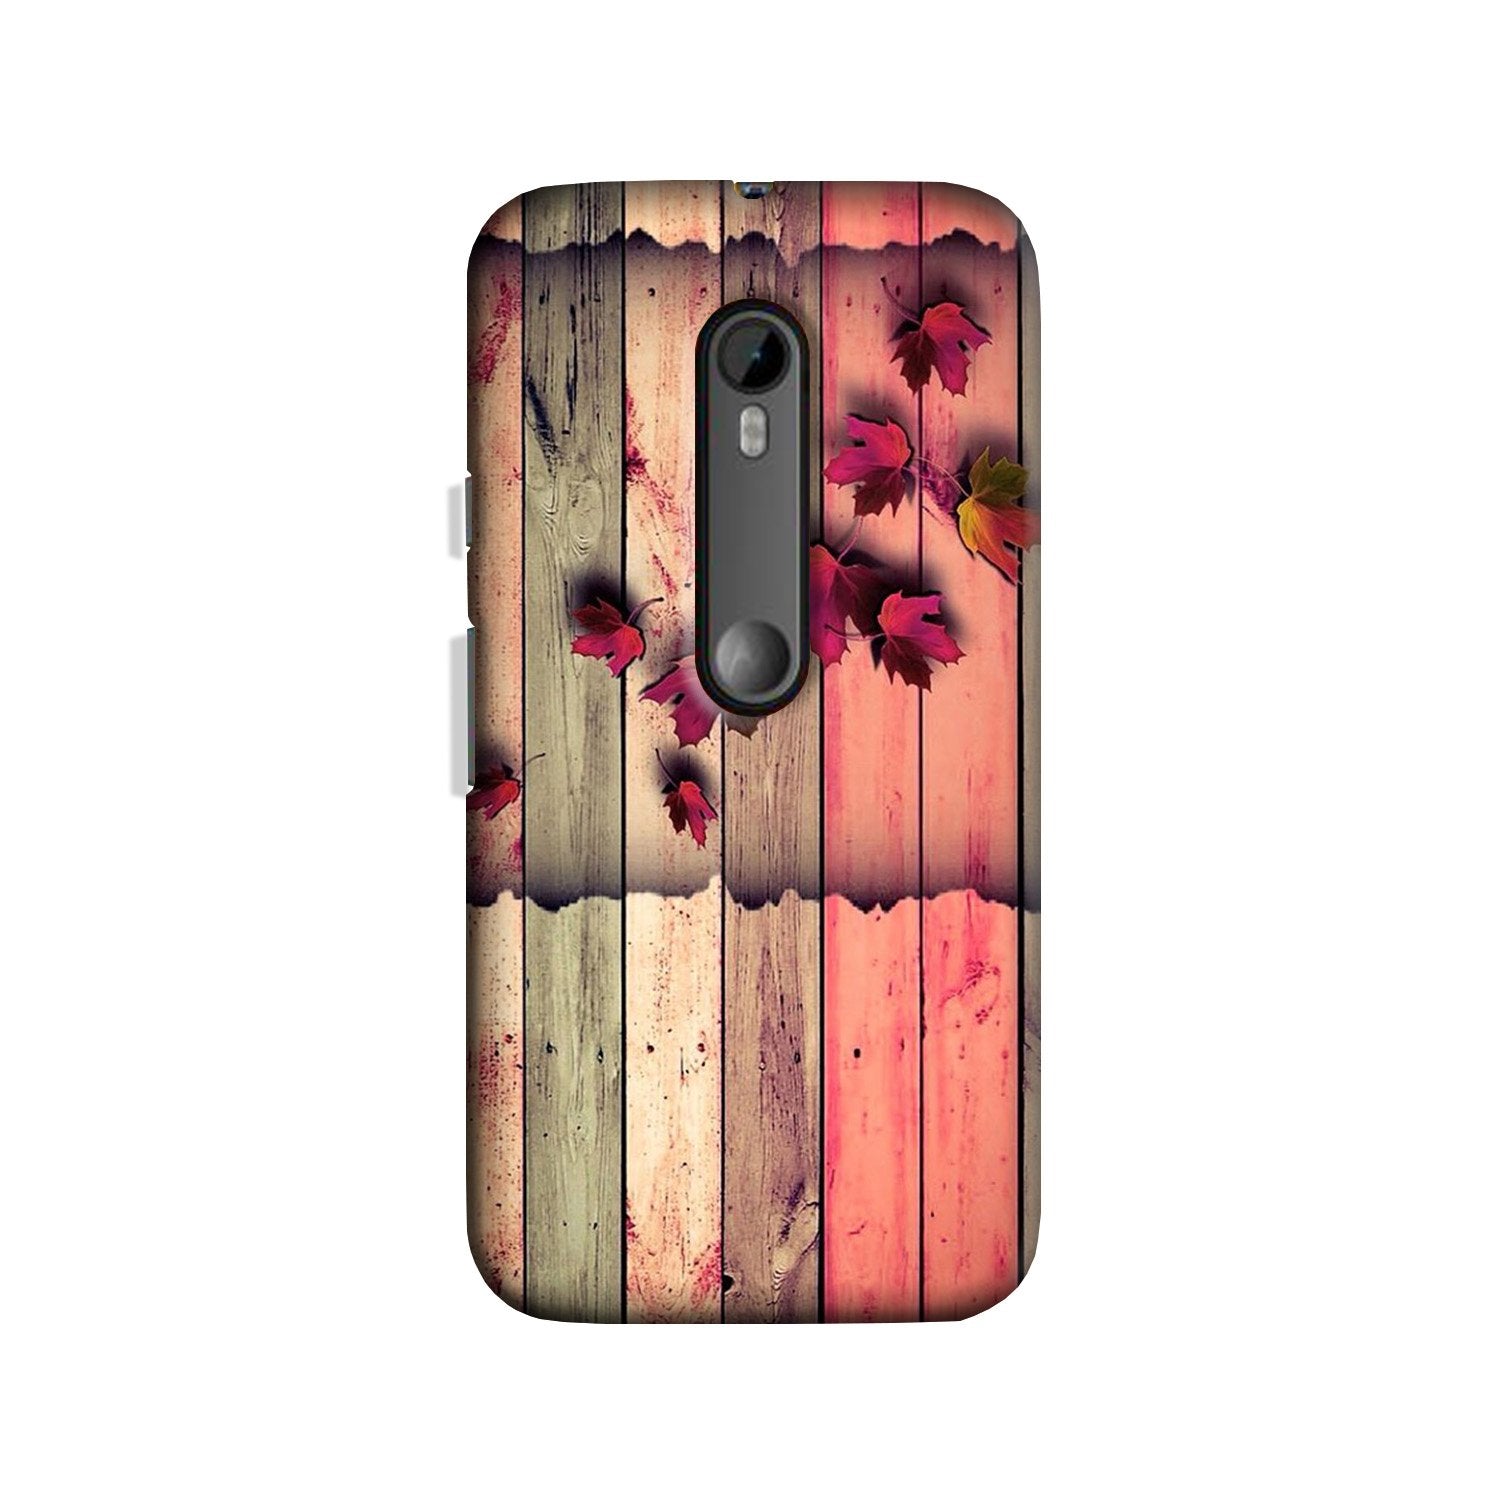 Wooden look2 Case for Moto X Force